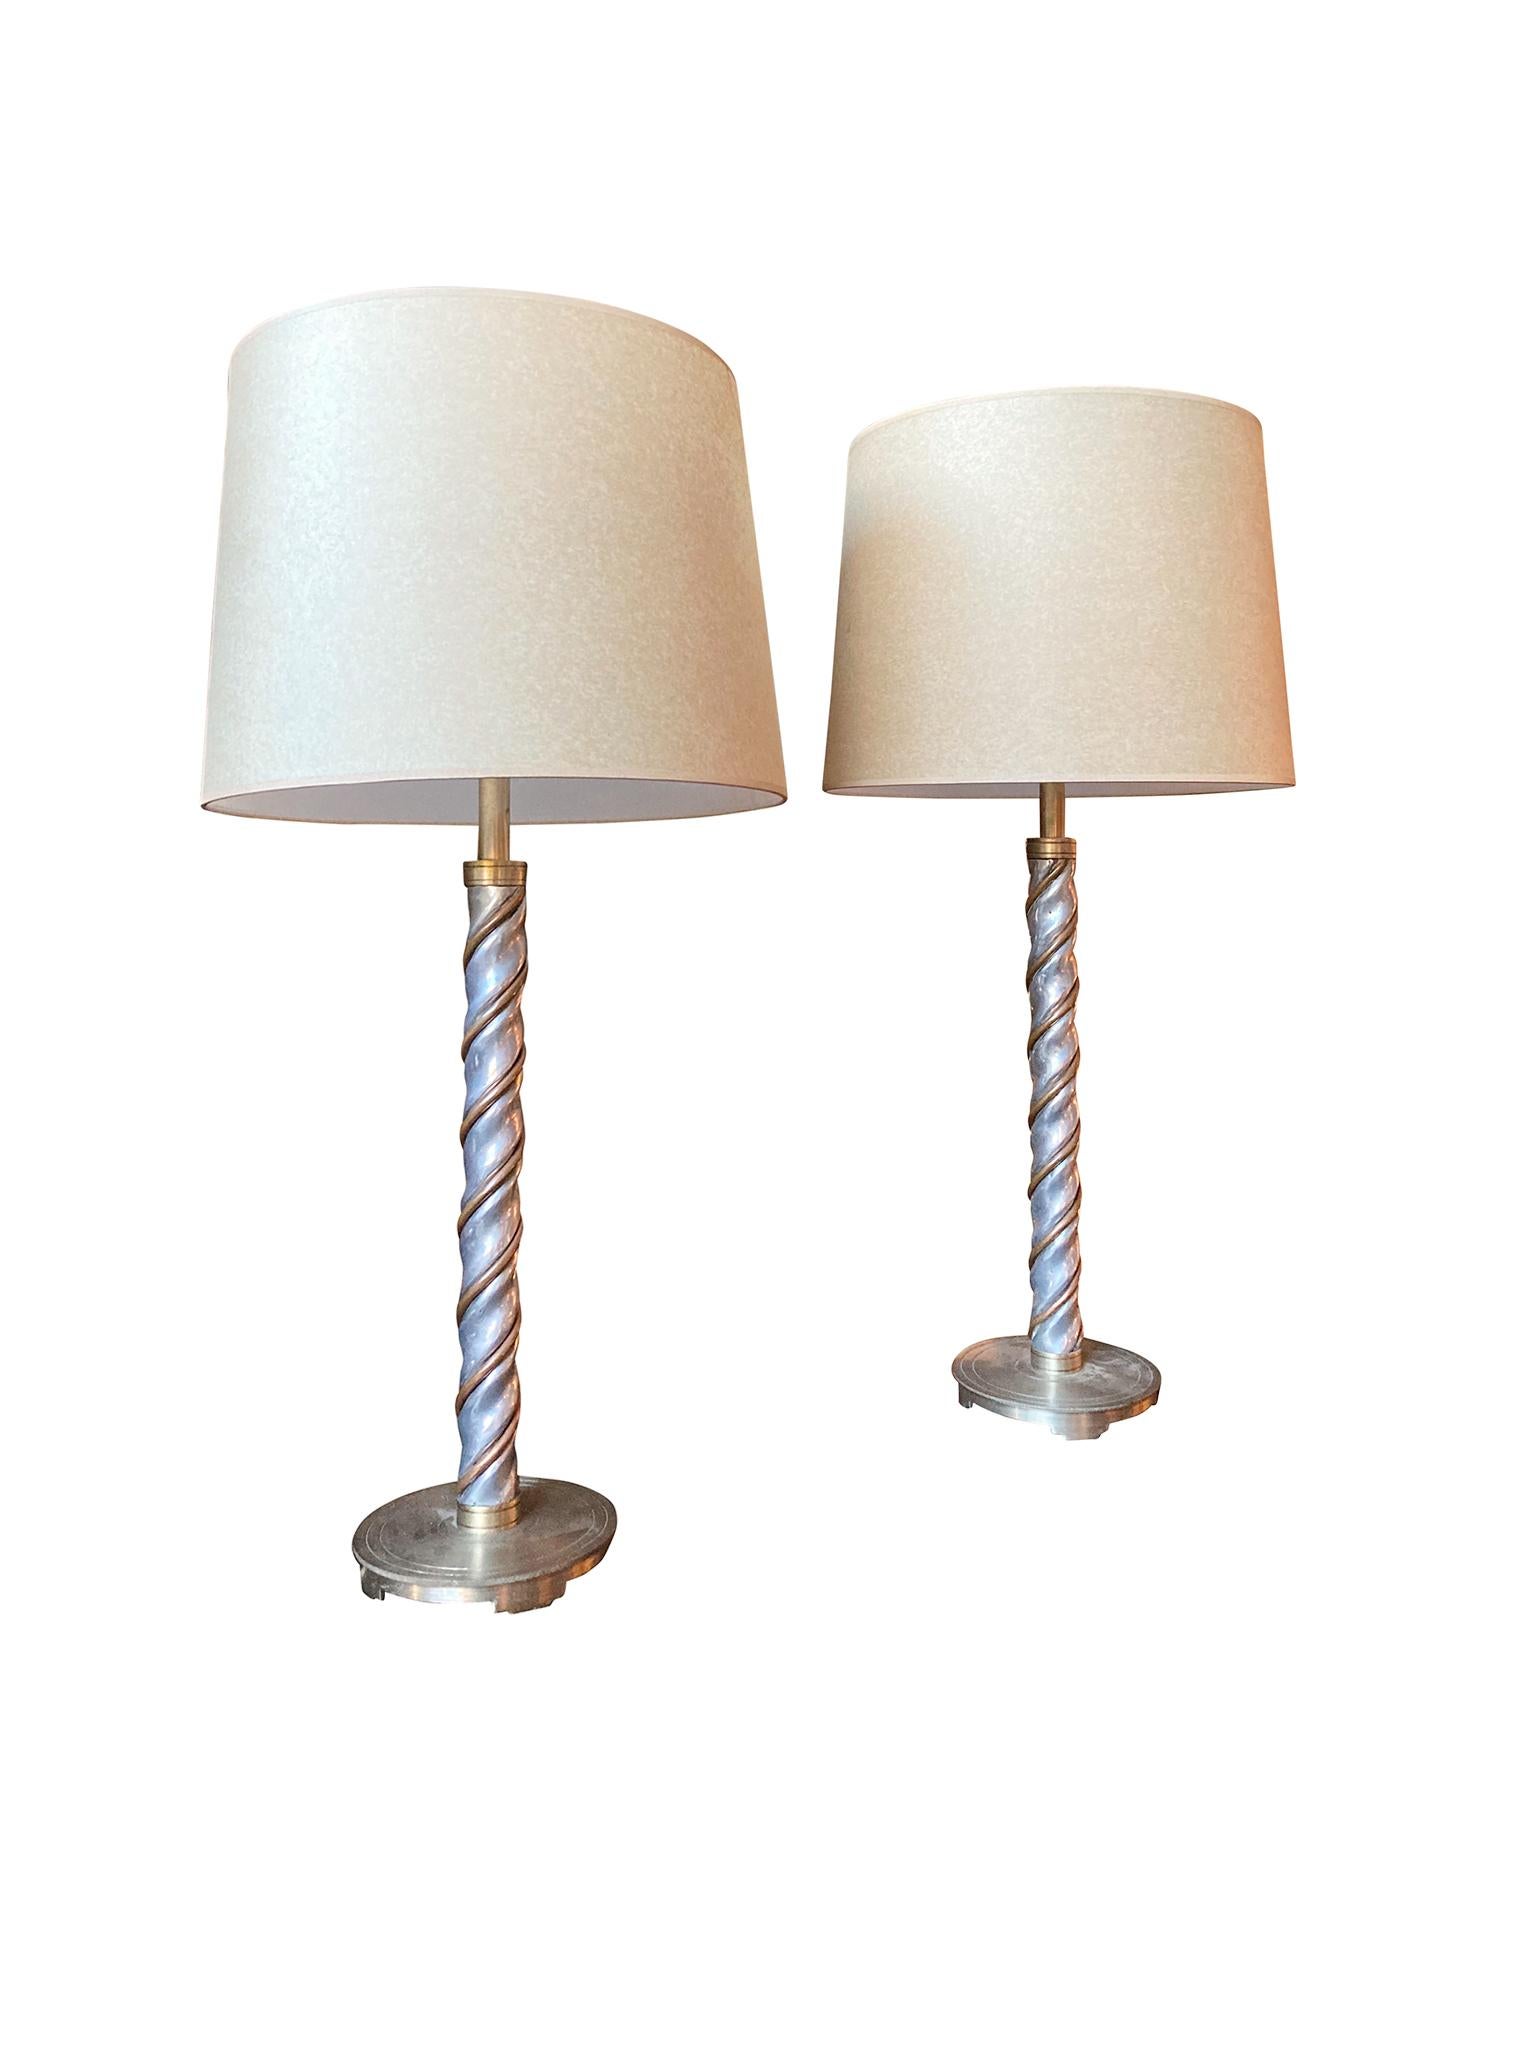 Pair of midcentury Art Deco style table lamps with copper and chrome. We love how these two metals are combined in a braided design mounted on a brass disc base. The lamps have double cluster bulb sockets with pull threads and are newly rewired.